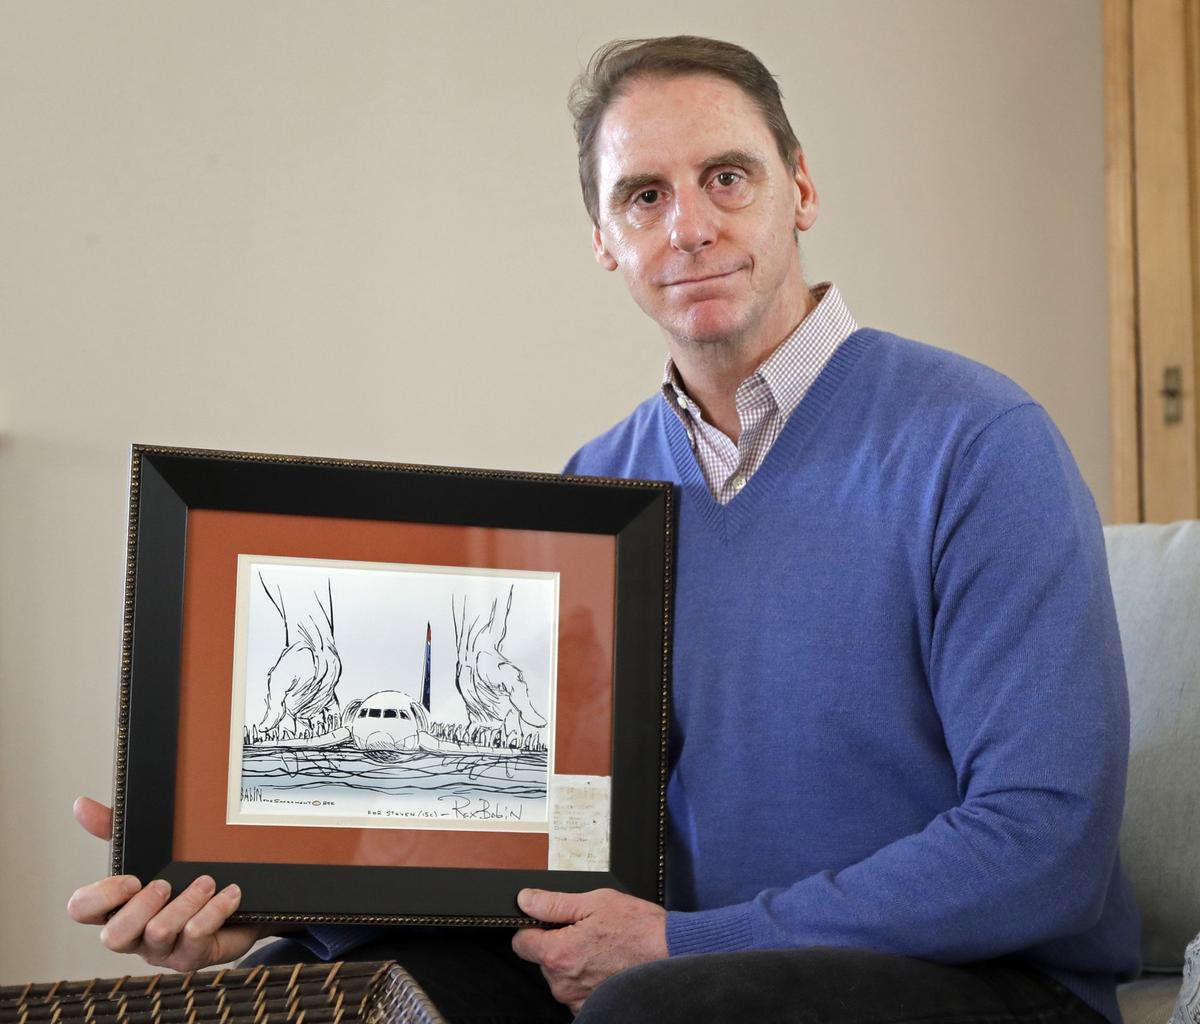 In this Jan. 10, 2019 photo, Steve O'Brien poses for a photo at his home in Charlotte, N.C., with an editorial cartoon framed with his boarding pass from US Airways Flight 1549, that eventually crash-landed in the Hudson River on Jan. 19, 2009. Tuesday, Jan. 19, 2019 is the 10th anniversary of the flight known as the "Miracle on the Hudson" after all 155 passengers and crew members survived. (Chuck Burton/AP Photo)